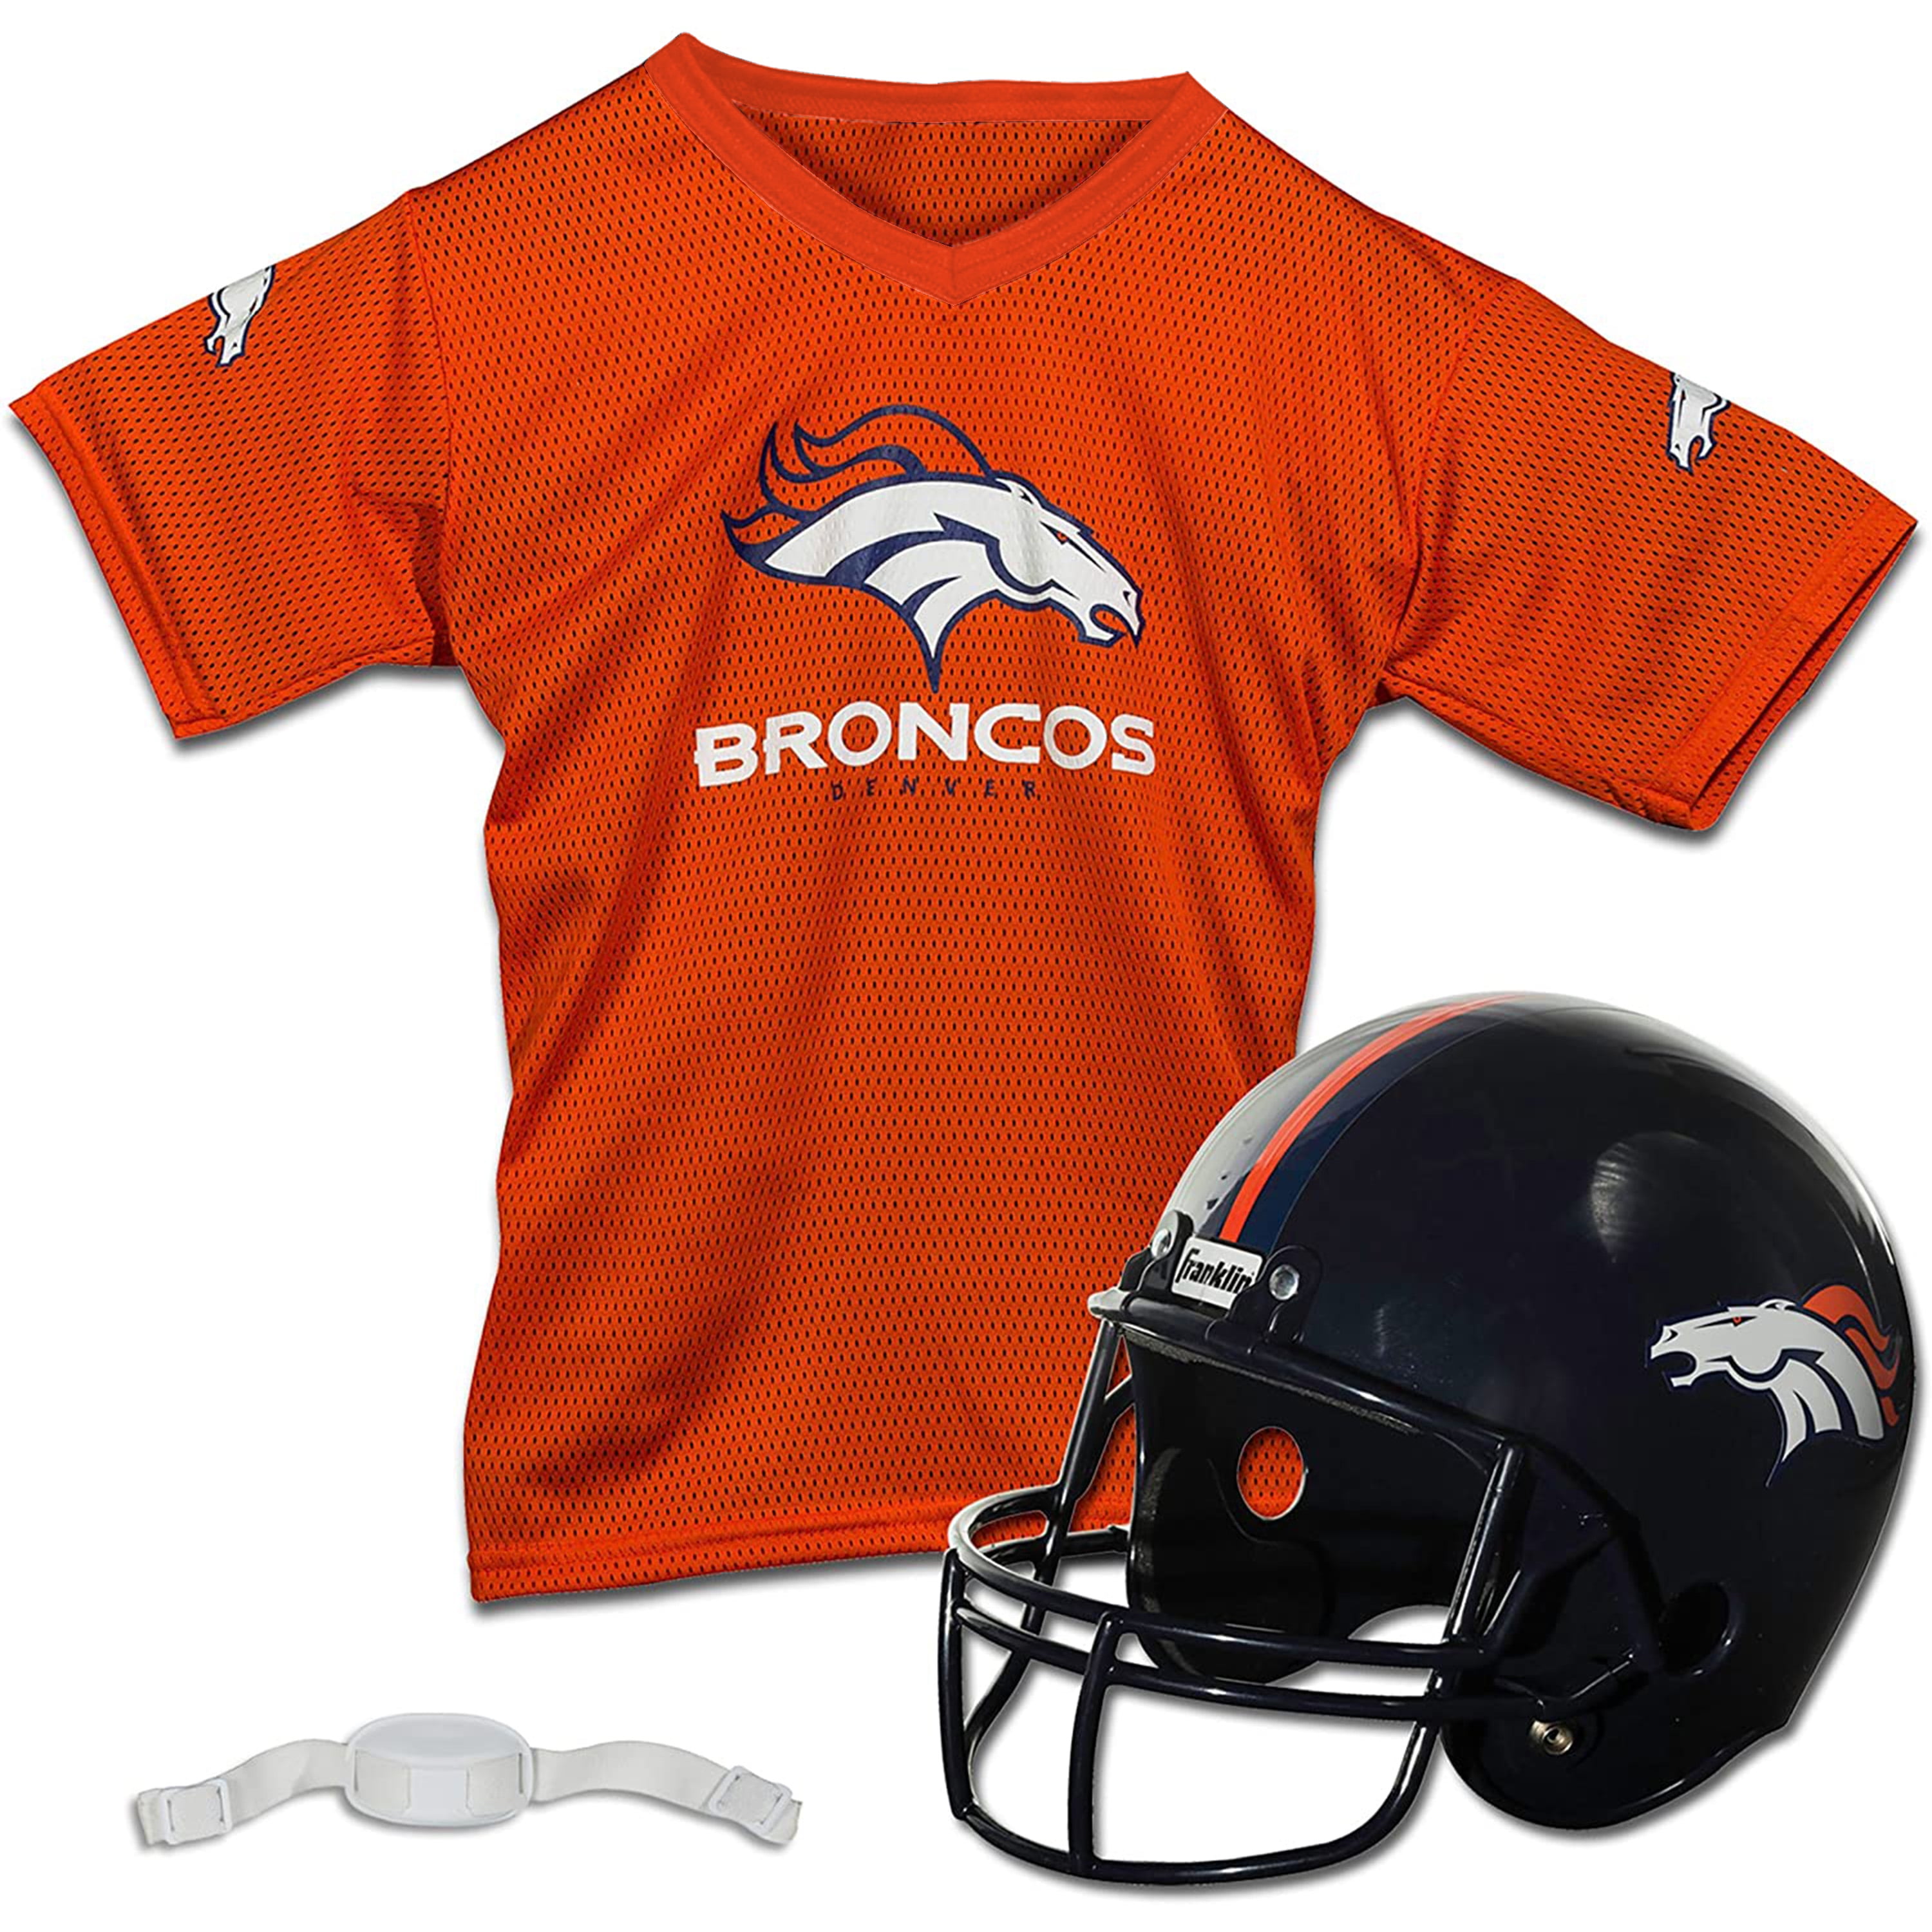 youth nfl football uniforms